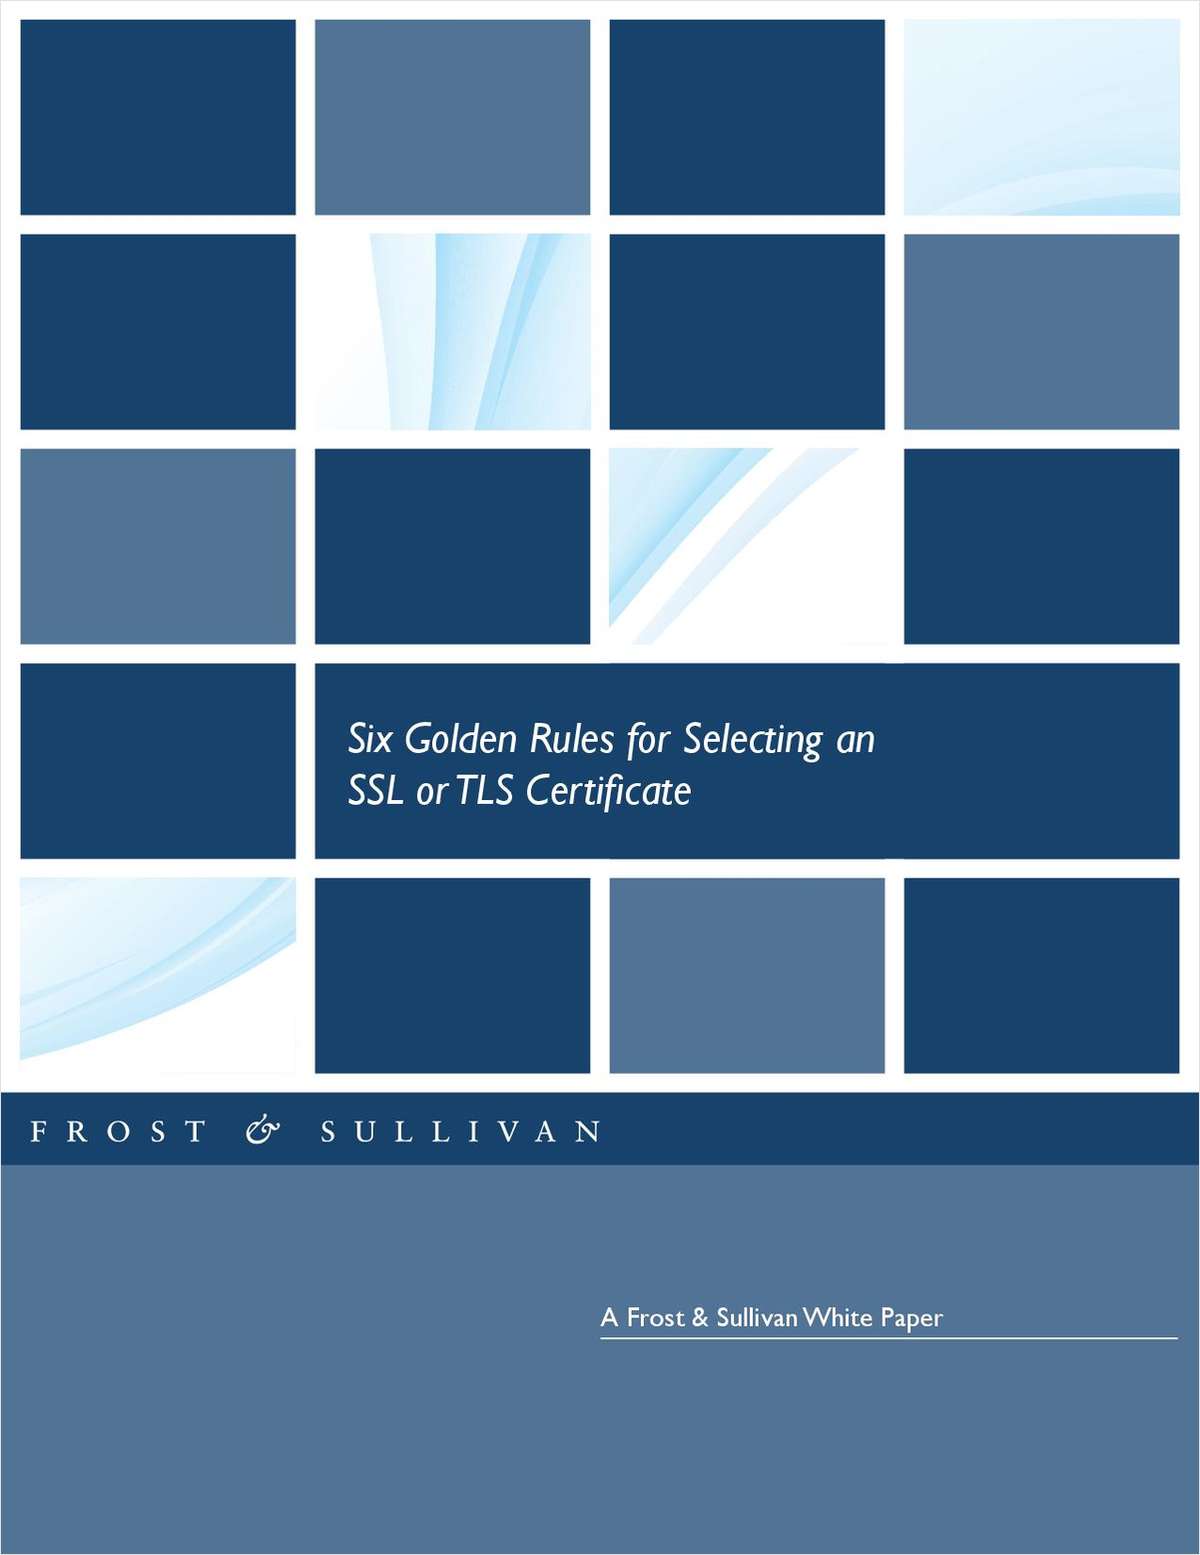 Frost & Sullivan Analyst Paper, 'Six Golden Rules for Selecting an SSL Certificate'